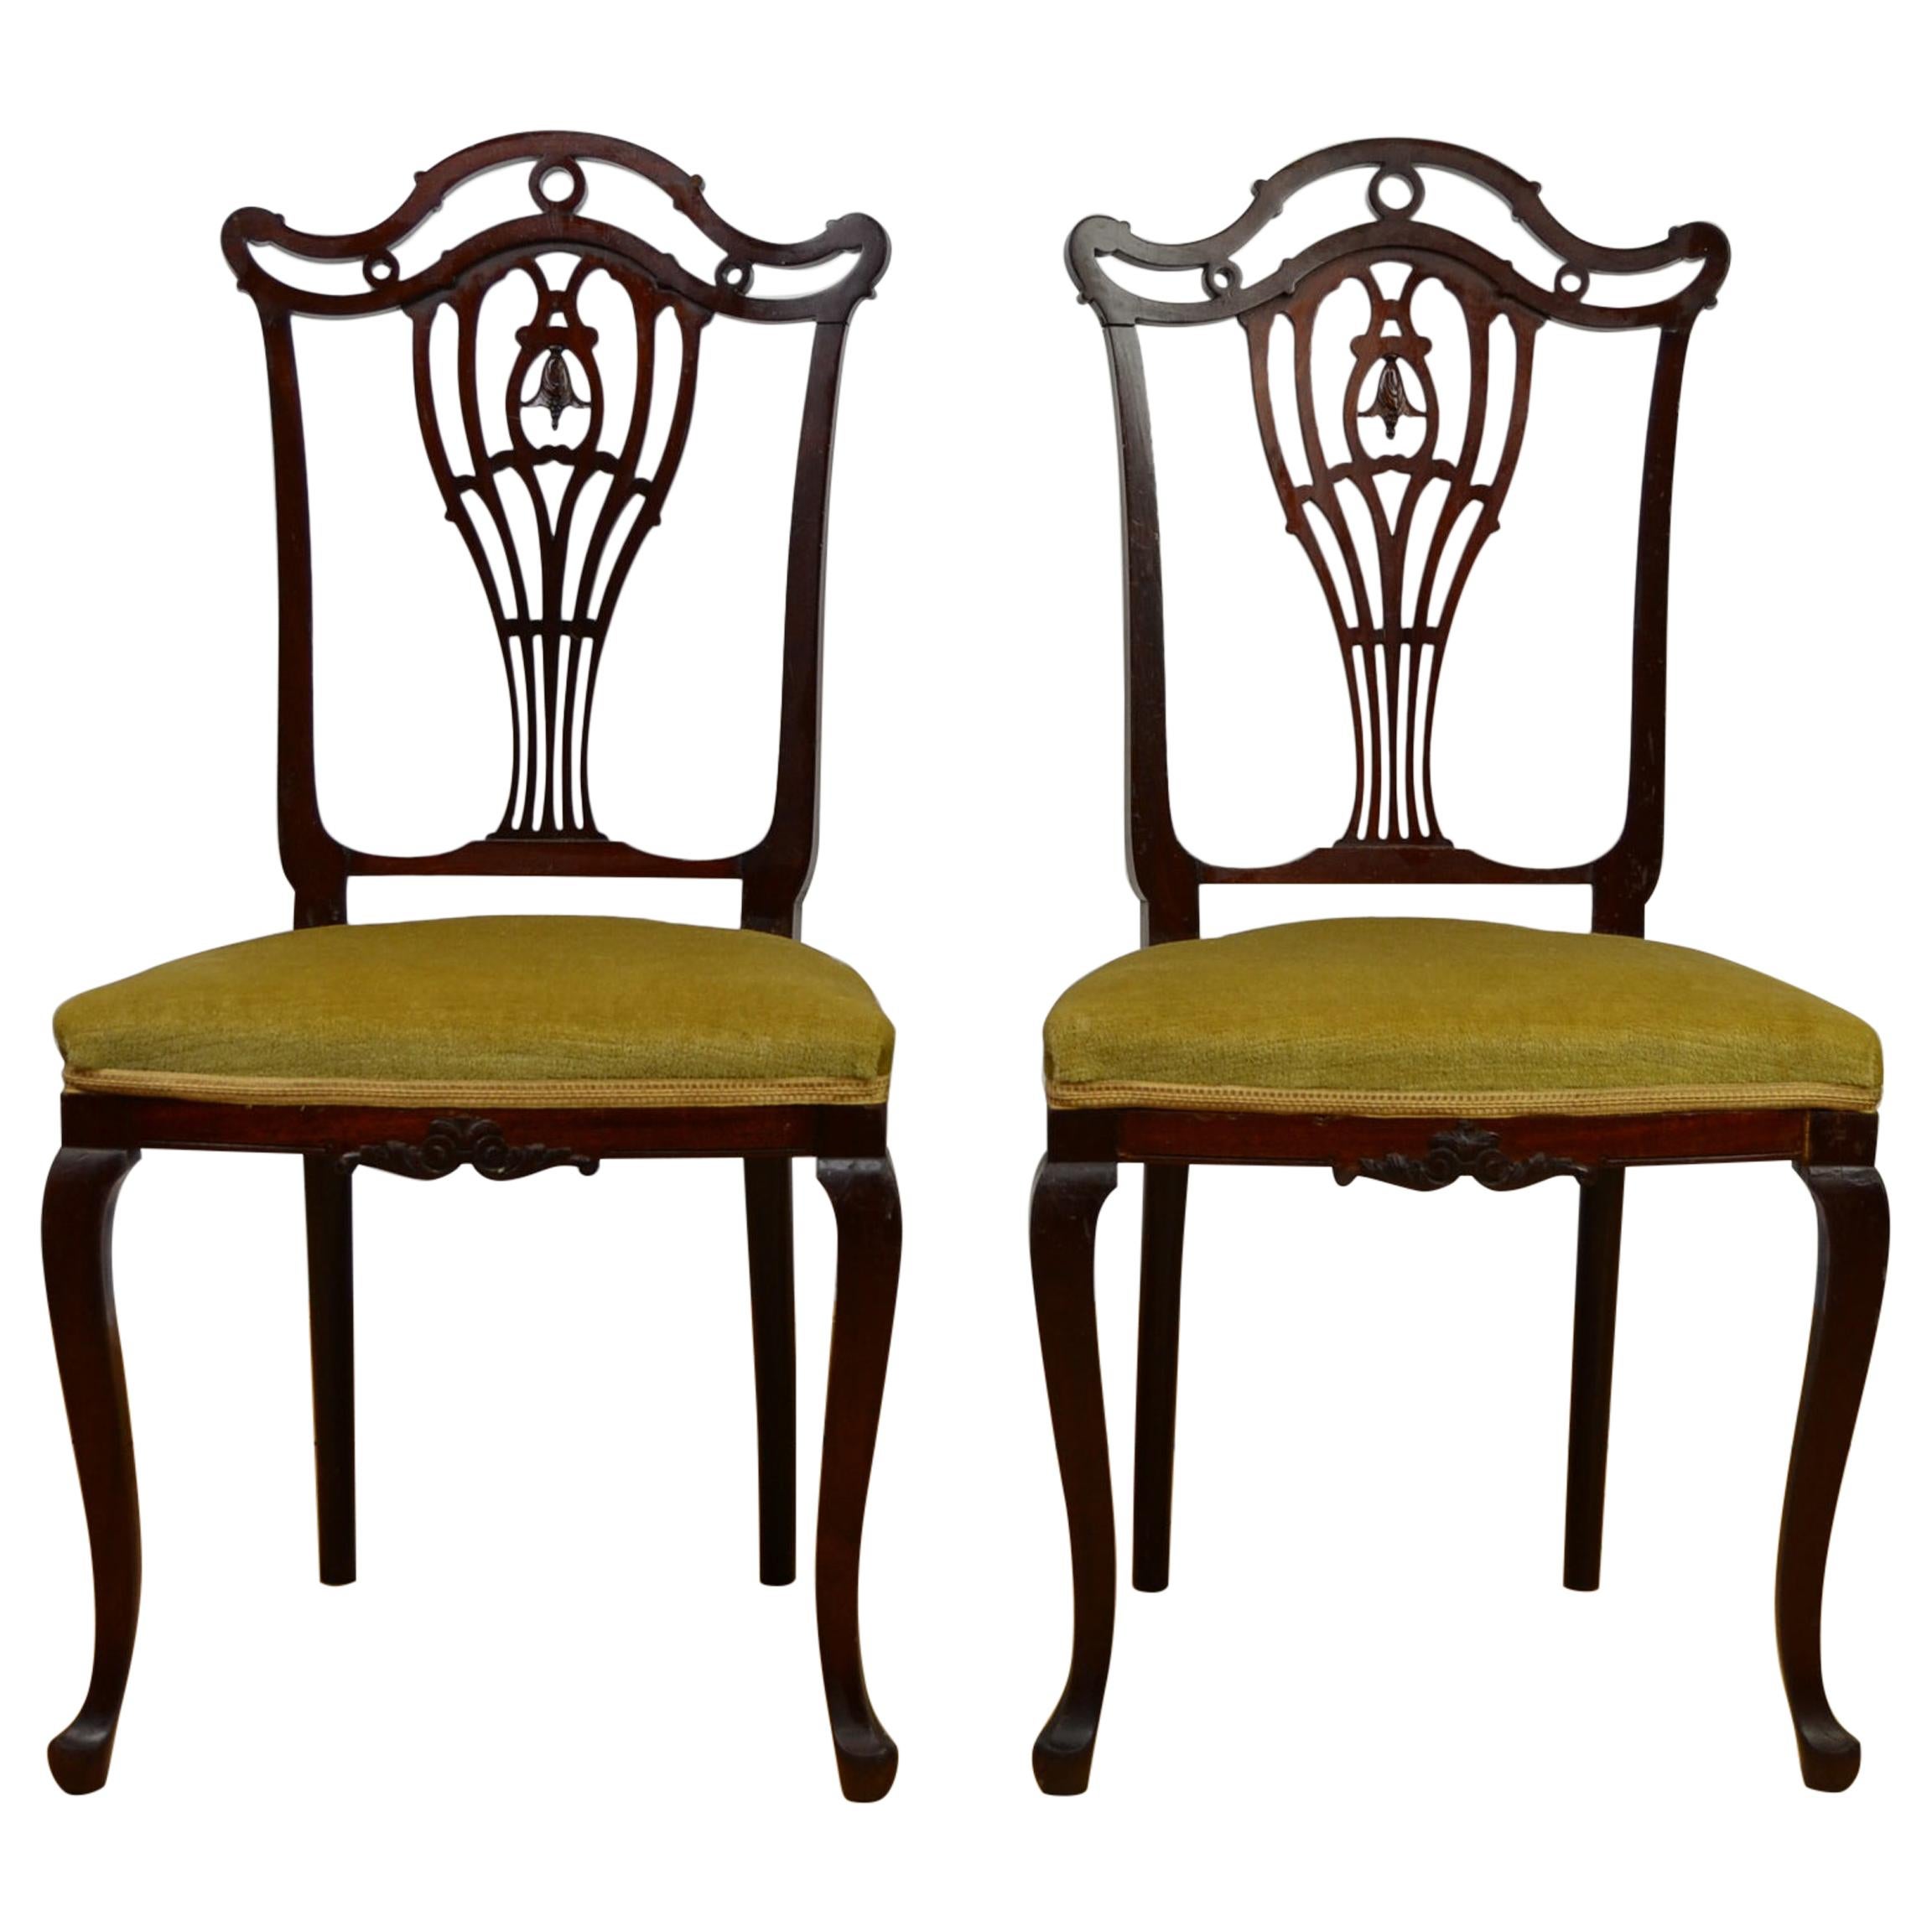 Hollandia Pander & Zn Pair of Side Chairs, Late 19th Century For Sale